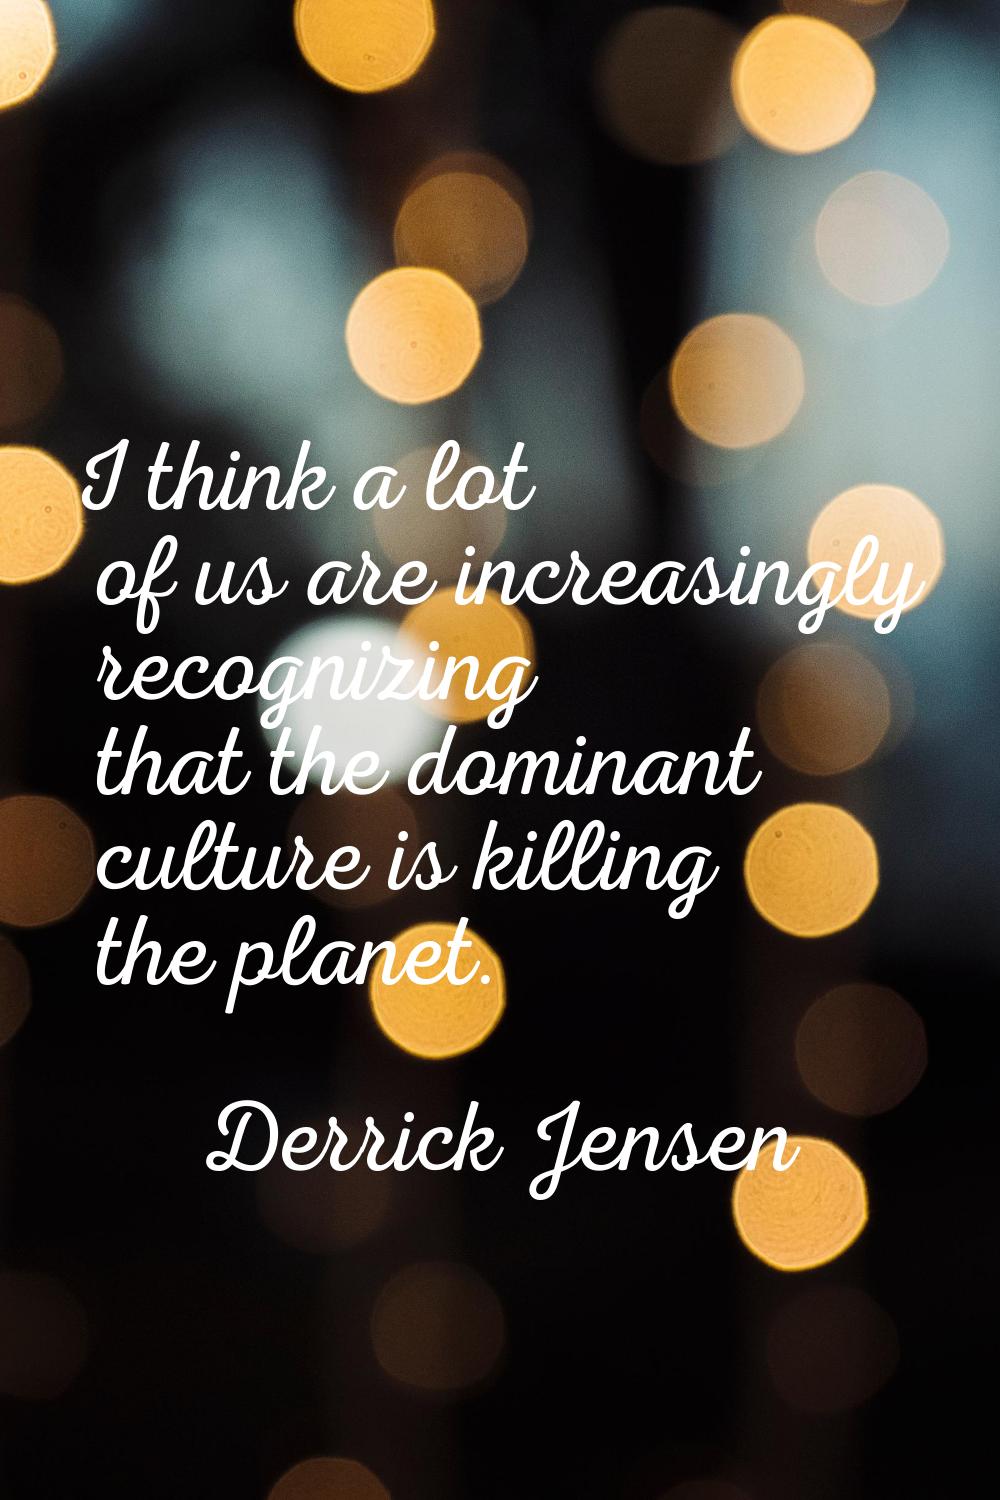 I think a lot of us are increasingly recognizing that the dominant culture is killing the planet.